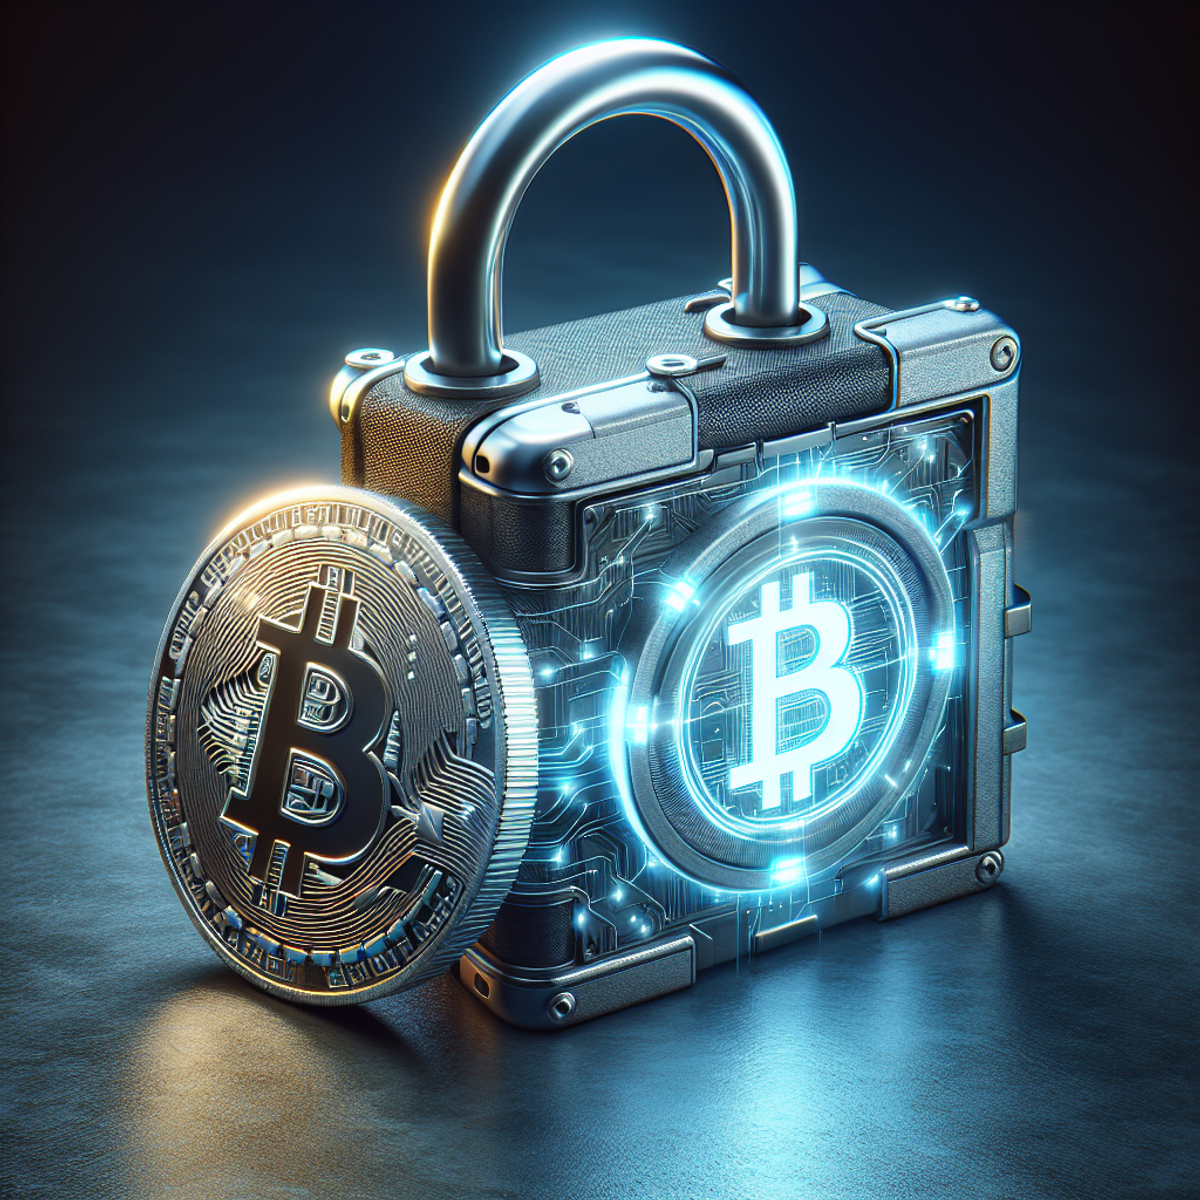 A close-up image of a robust metal padlock attached to a high-tech digital wallet, symbolizing high security for Bitcoin storage.